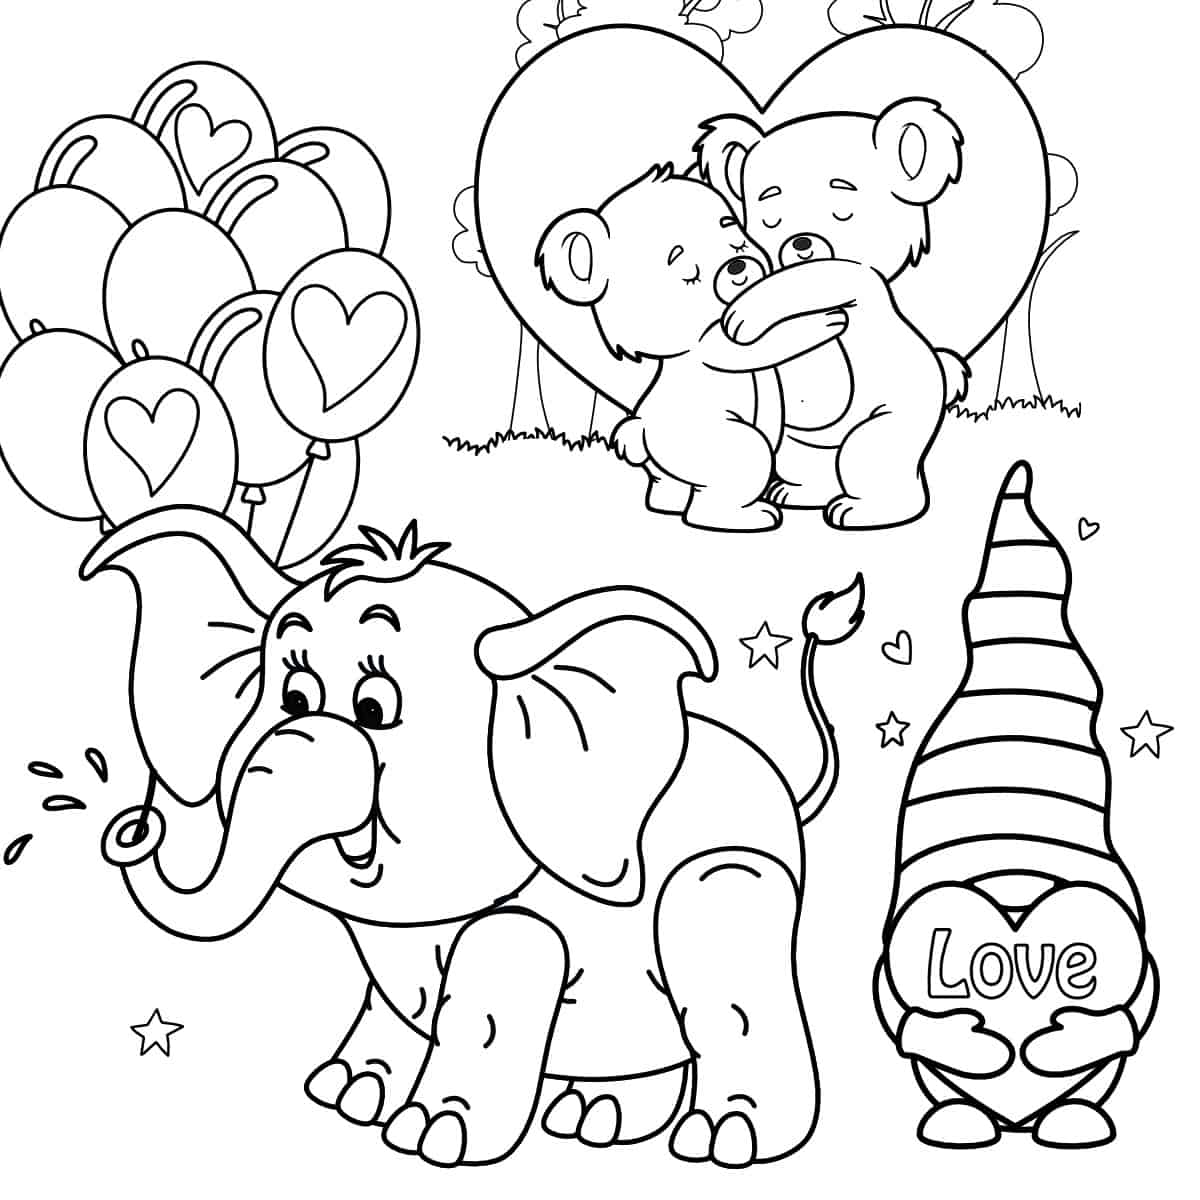 60 Valentine’s Day Coloring Pages for Free